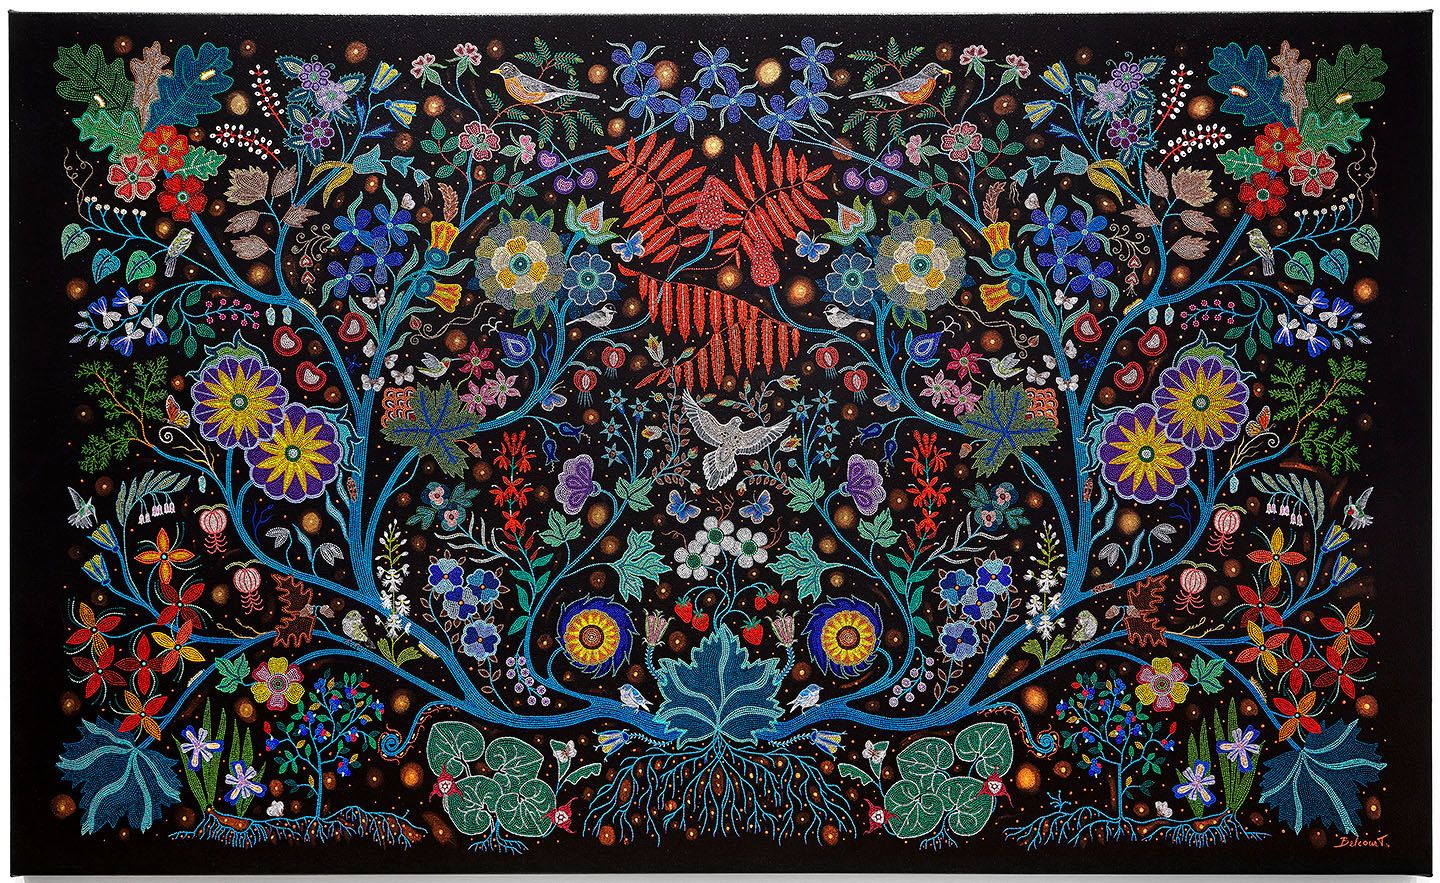 An intricate, colourful, beadwork-inspired painting of nature on a black background